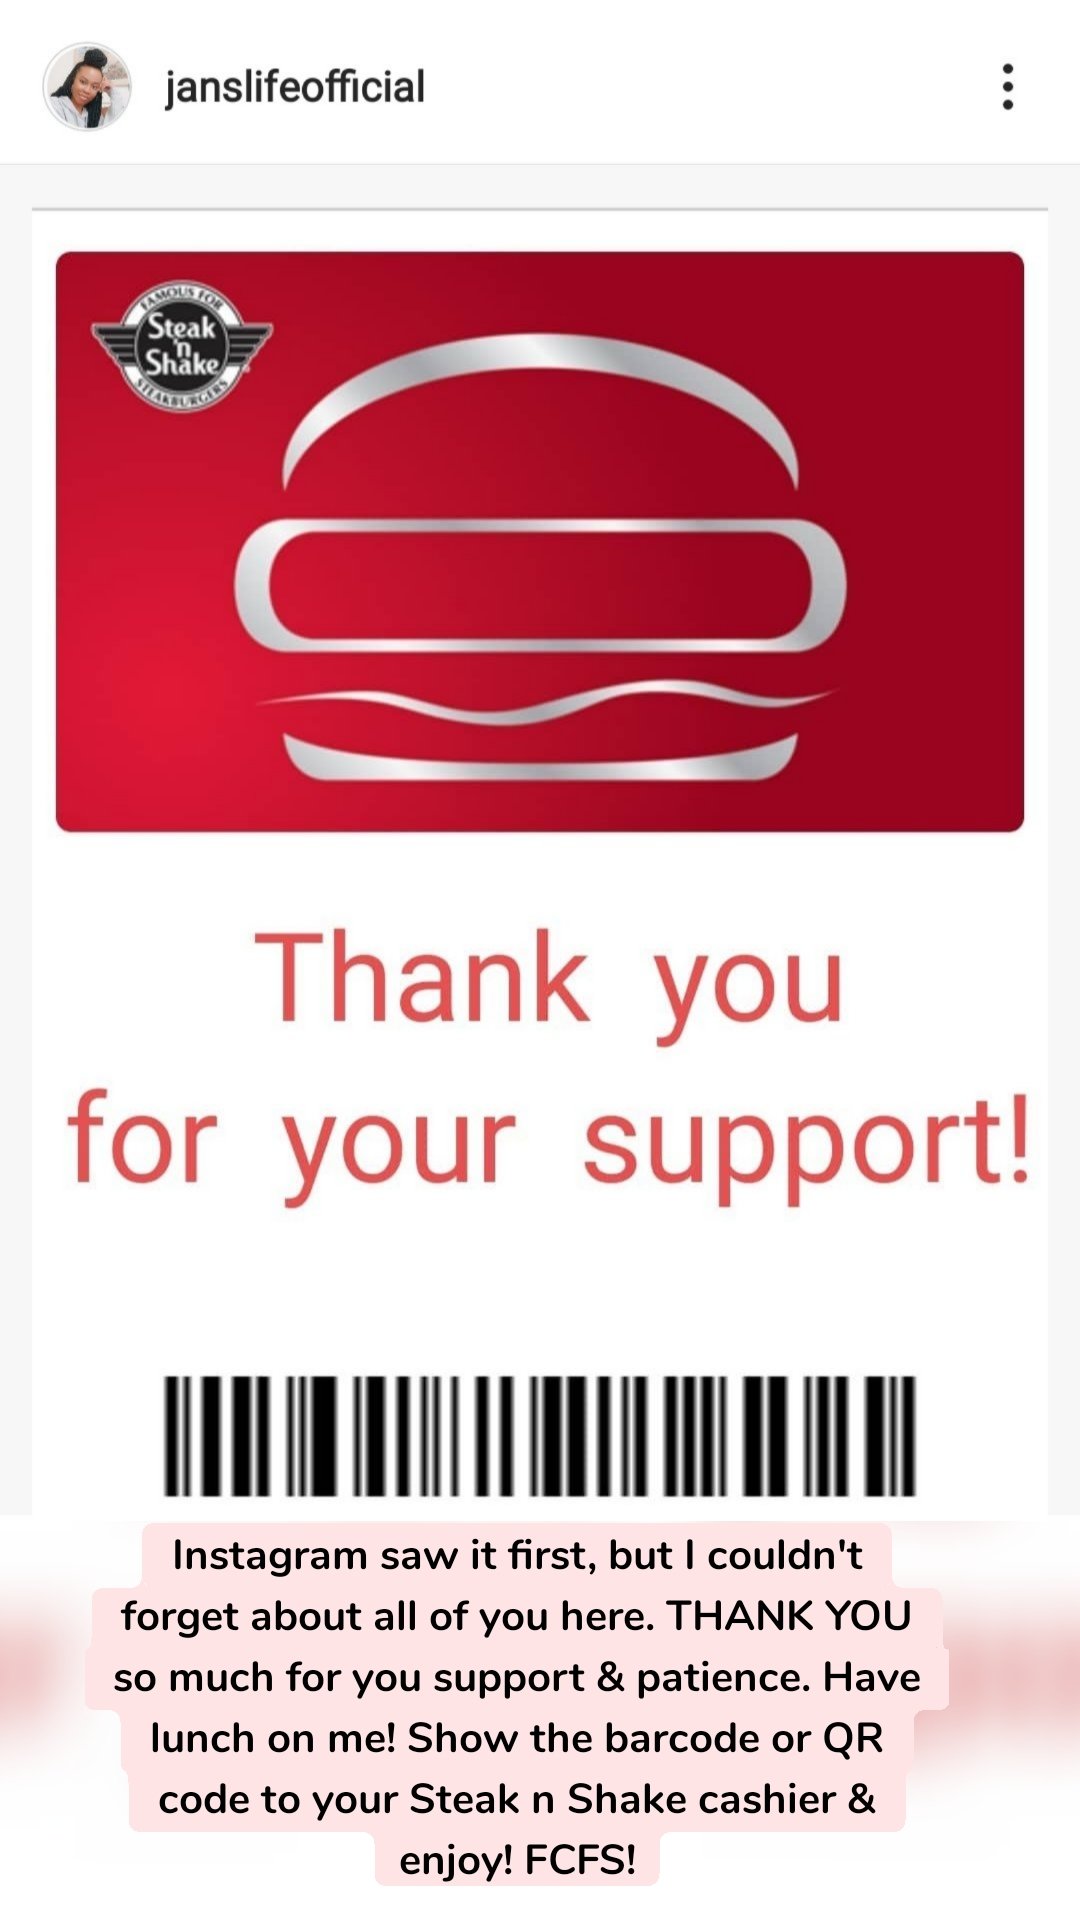 Instagram saw it first, but I couldn't forget about all of you here. THANK YOU so much for you support & patience. Have lunch on me! Show the barcode or QR code to your Steak n Shake cashier & enjoy! FCFS!